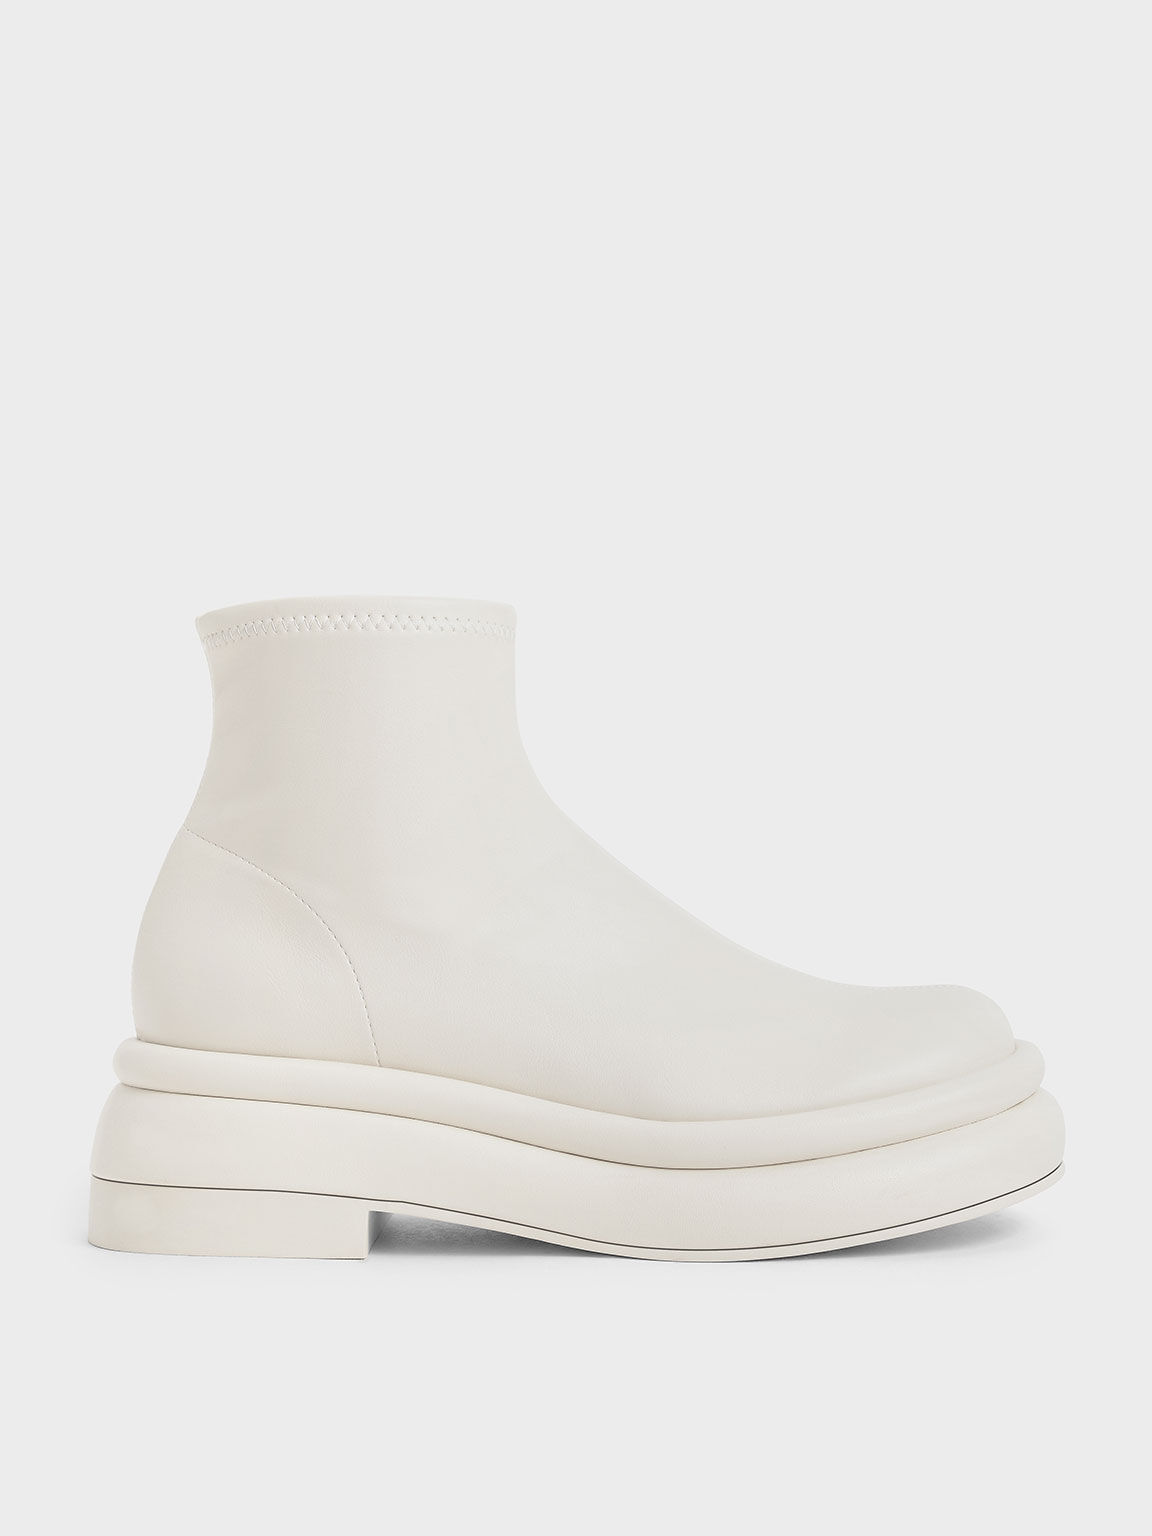 Charlies & Keith Nola Slip-On Ankle Boots